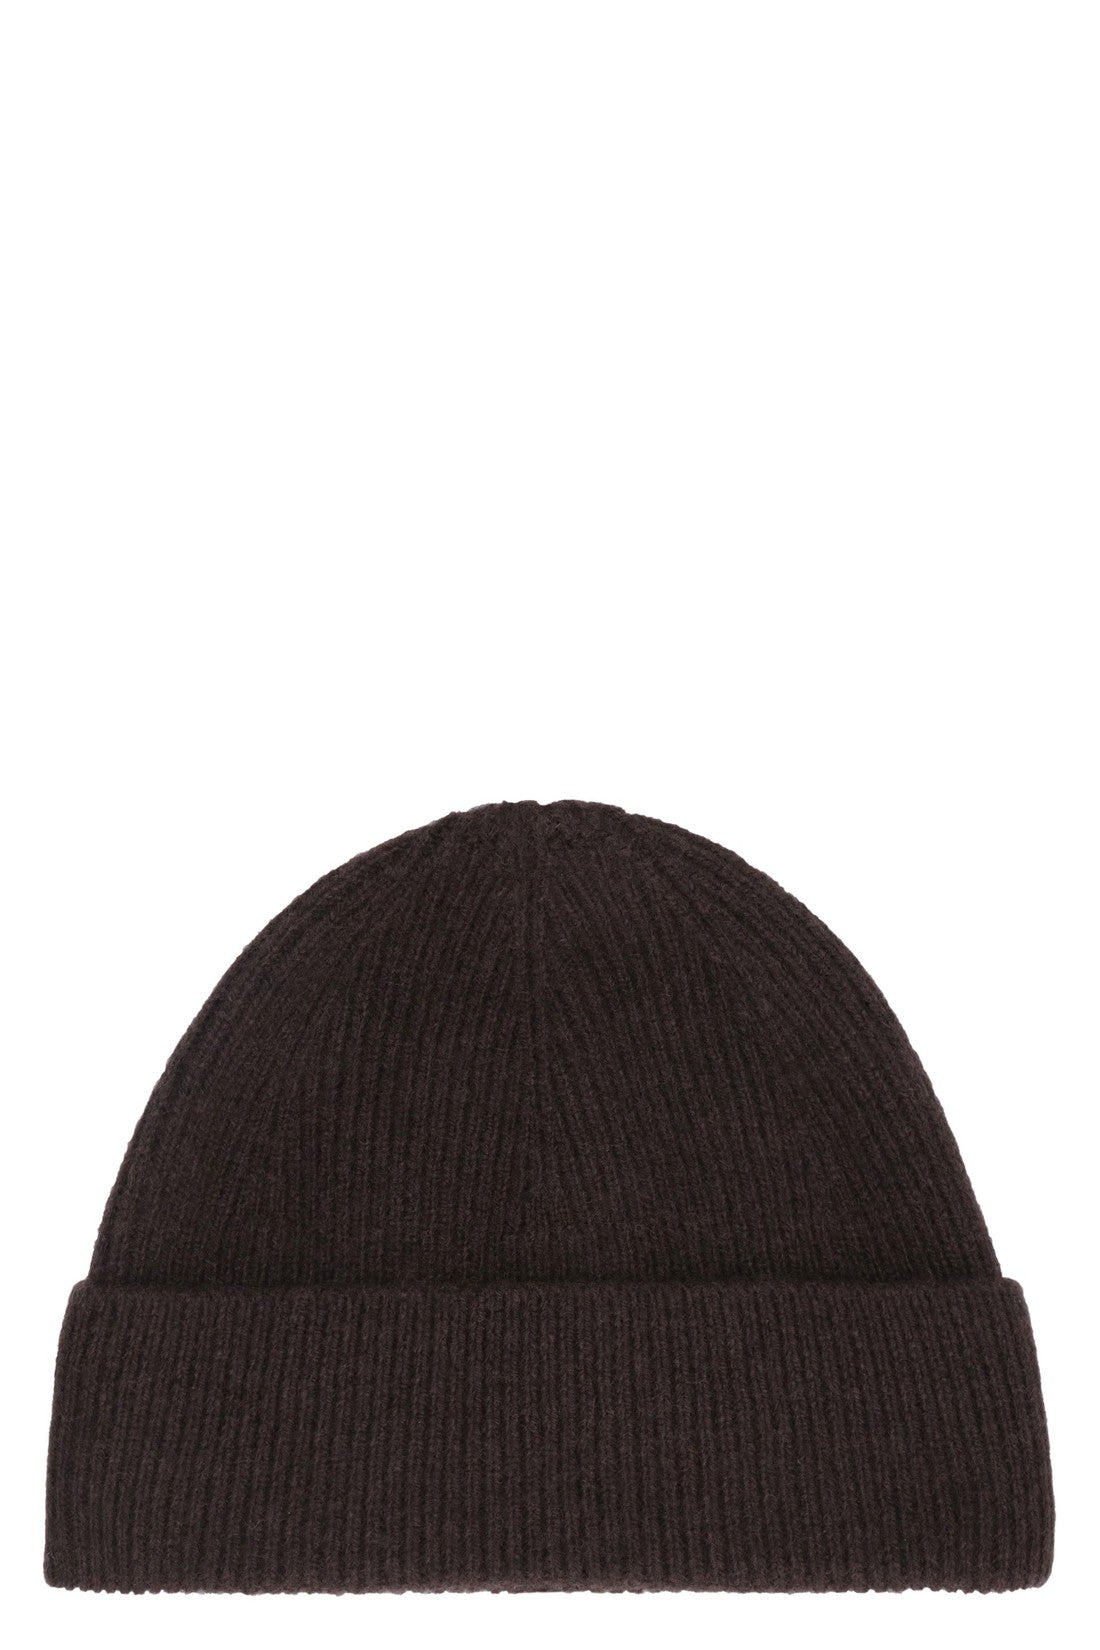 Acne Studios-OUTLET-SALE-Wool and cashmere hat-ARCHIVIST